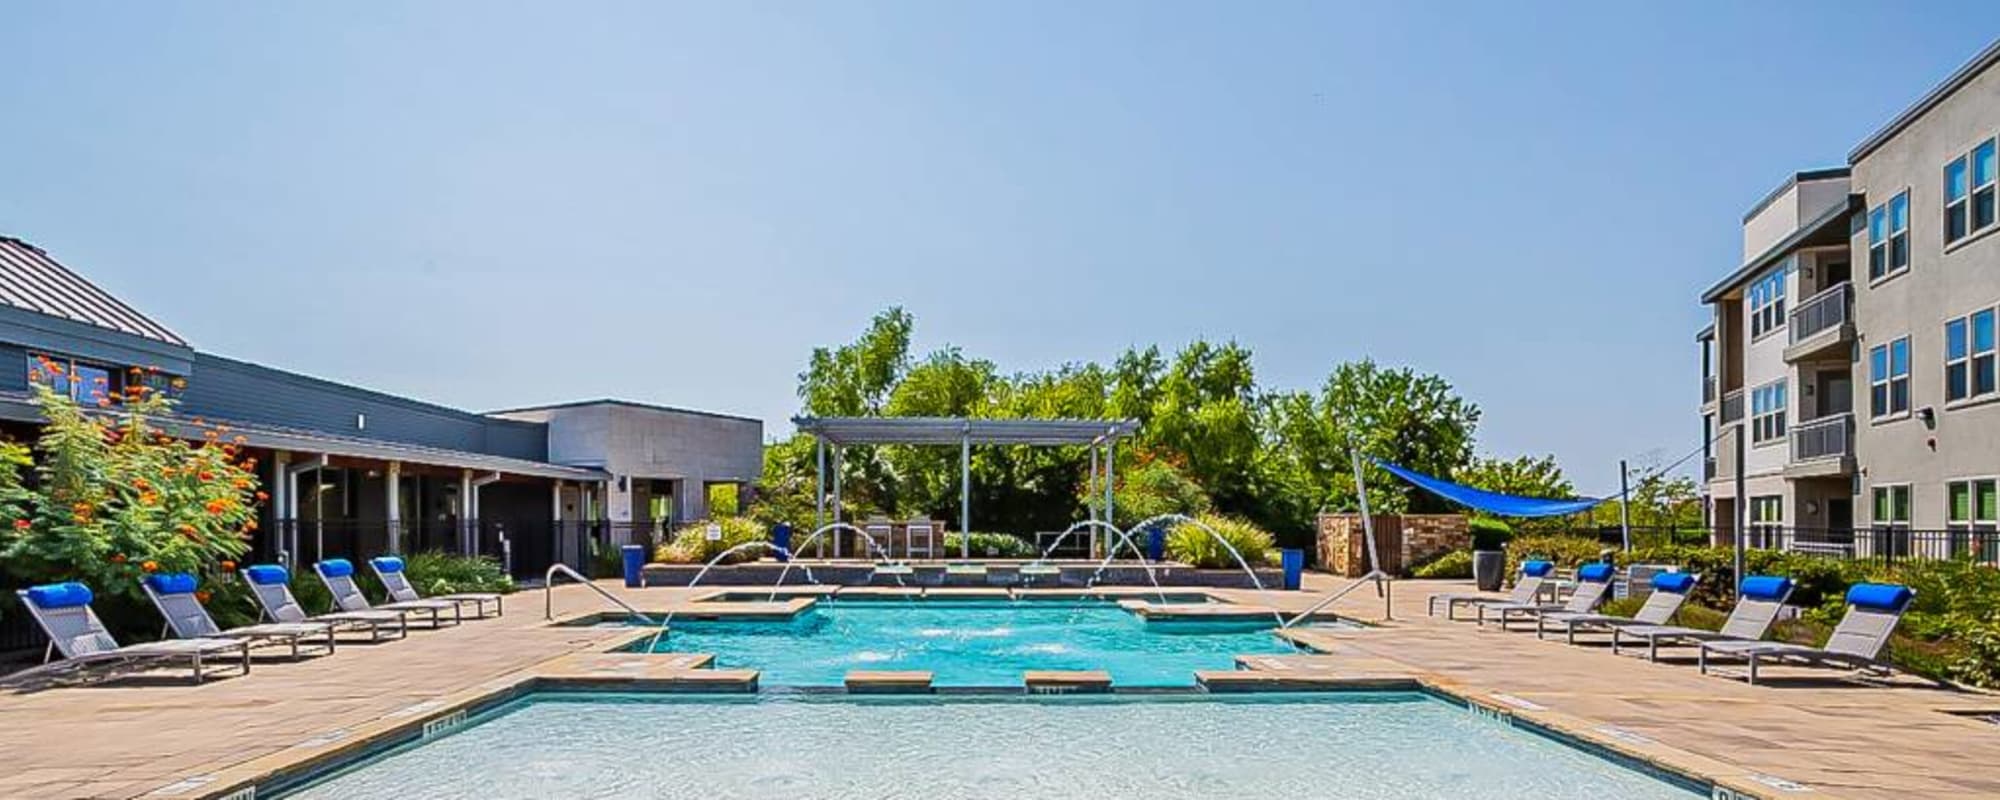 Outdoor pool at The Landings at Brooks City-Base in San Antonio, Texas